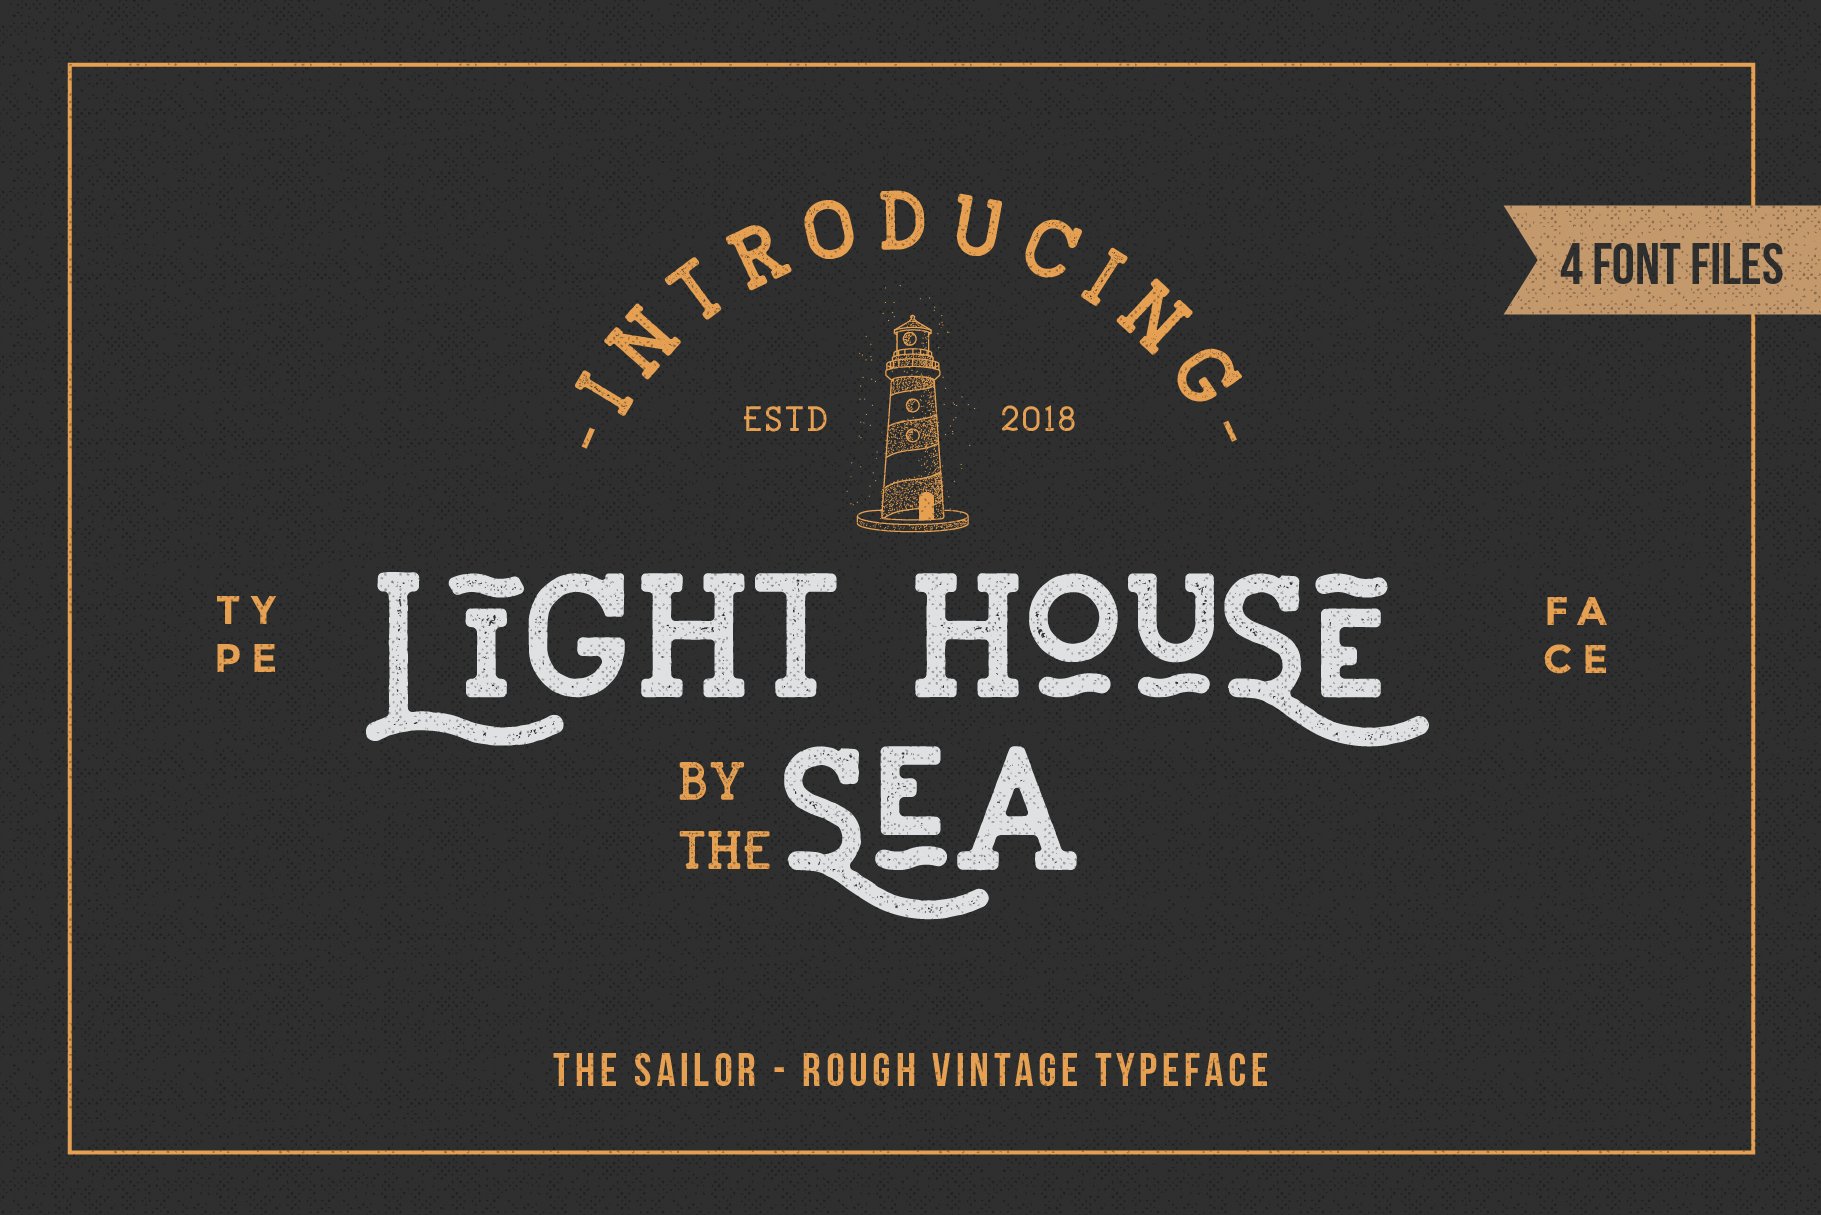 LightHouse - Sailor Rough Typeface cover image.